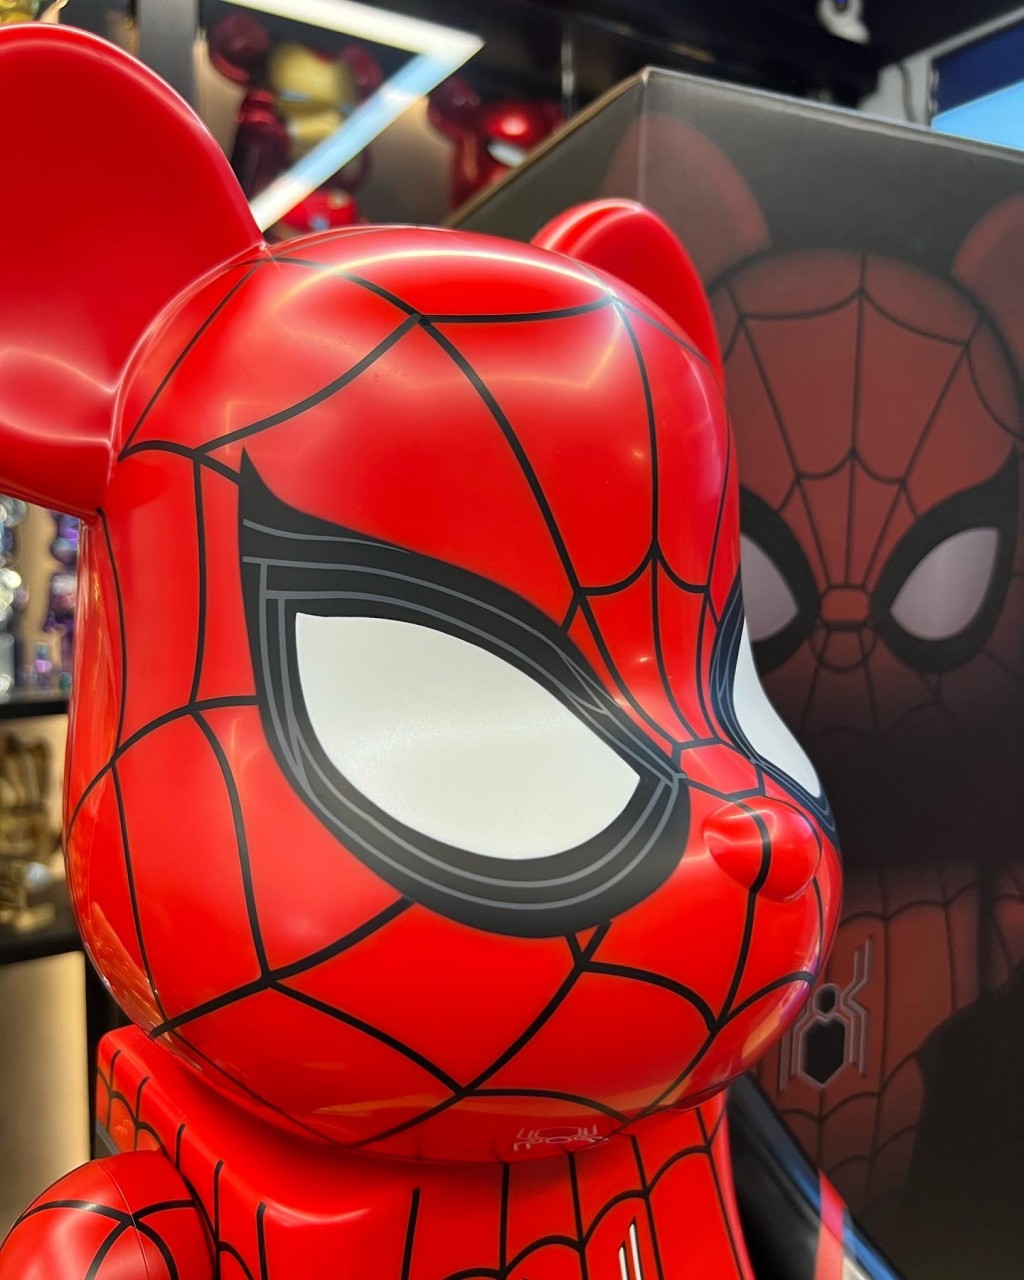 1000％ Be@rbrick Spider-Man Upgraded Suit